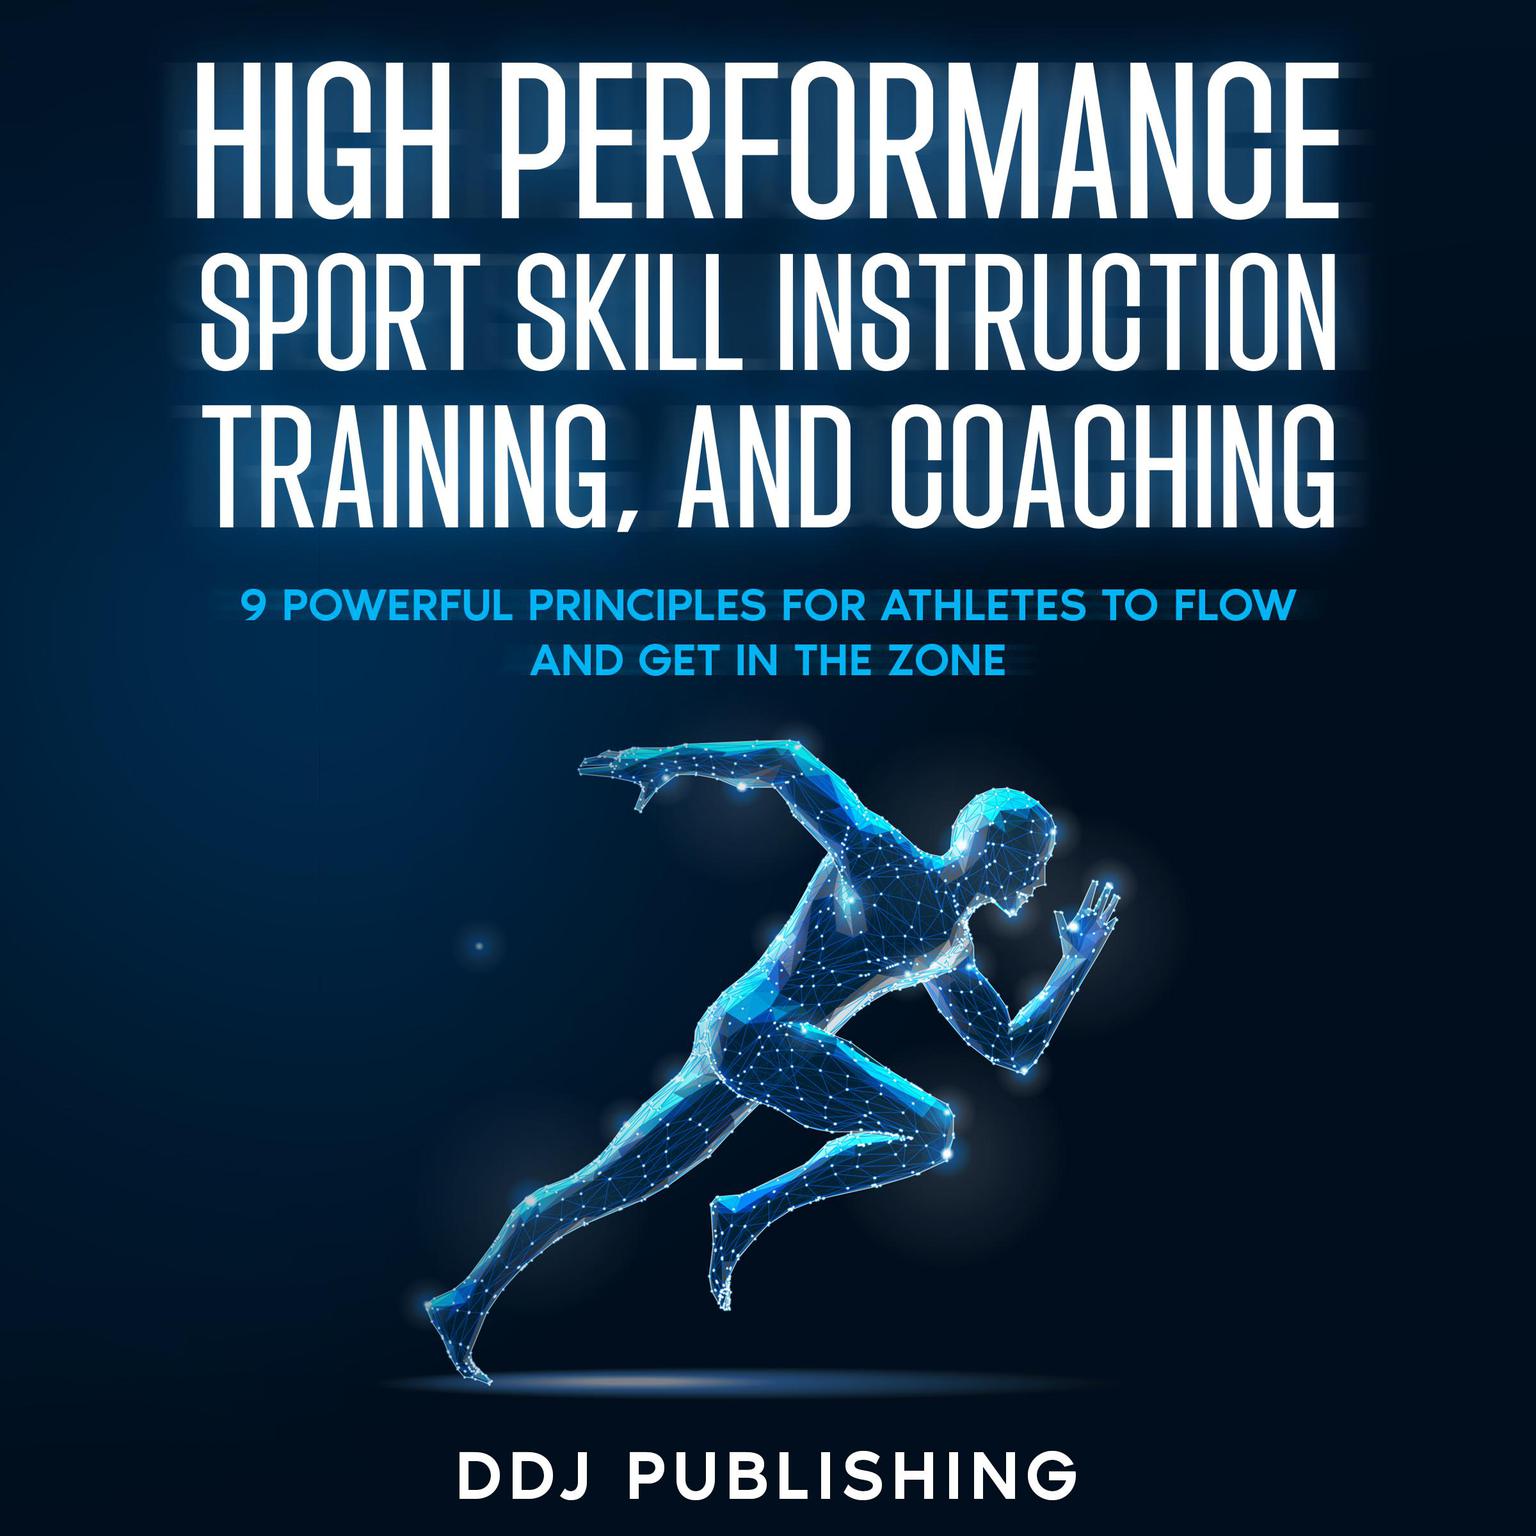 High Performance Sport Skill Instruction, Training, and Coaching Audiobook, by DDJ Publishing